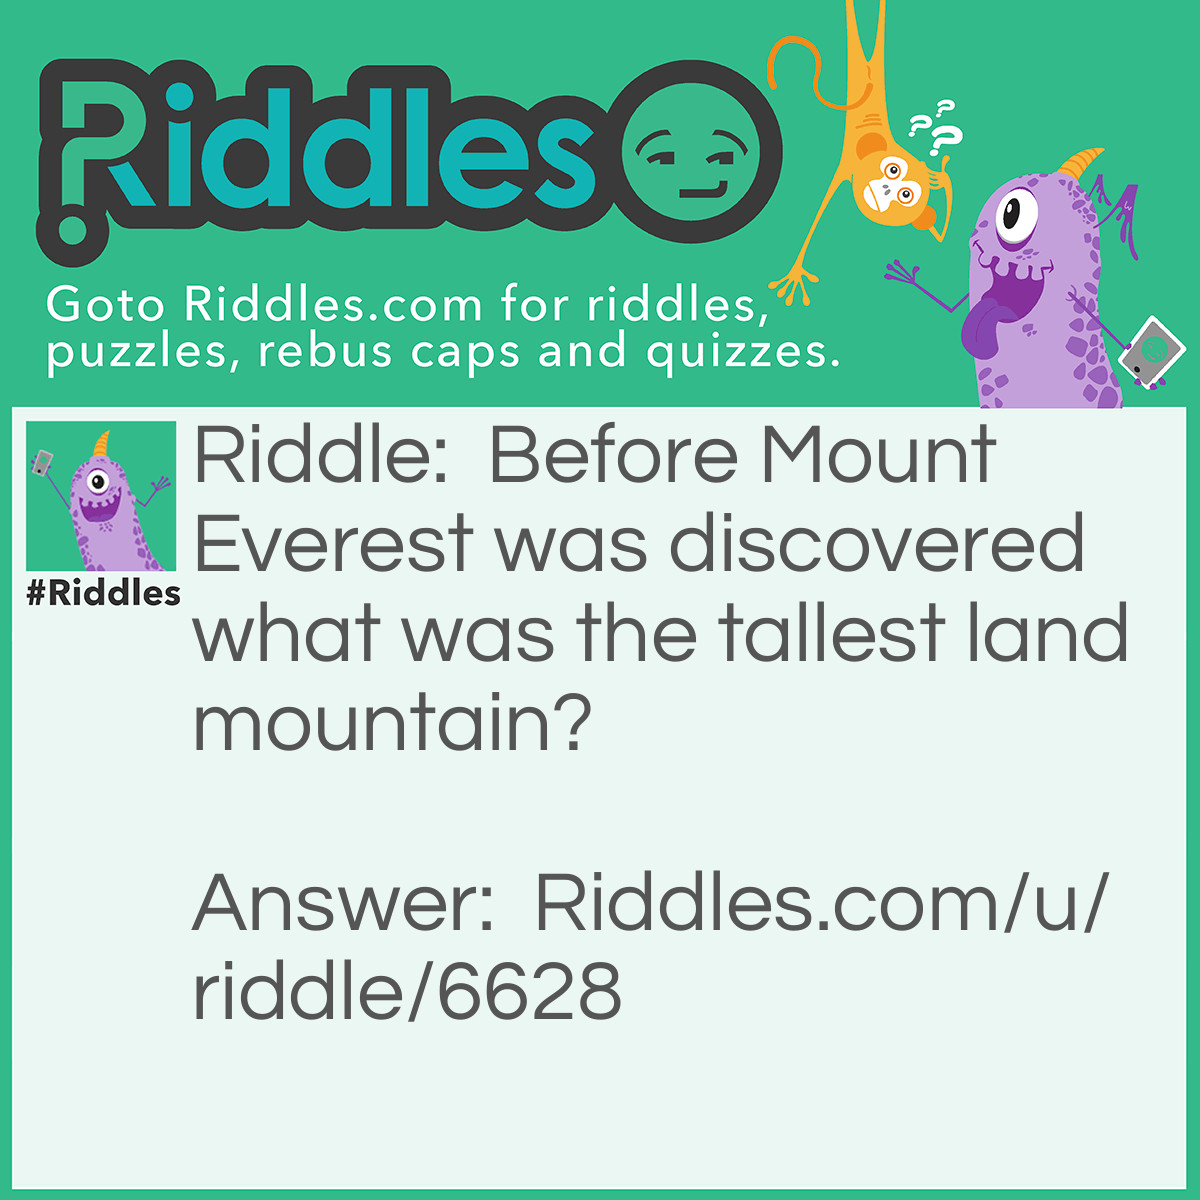 Riddle: Before Mount Everest was discovered what was the tallest land mountain? Answer: Mount Everest.